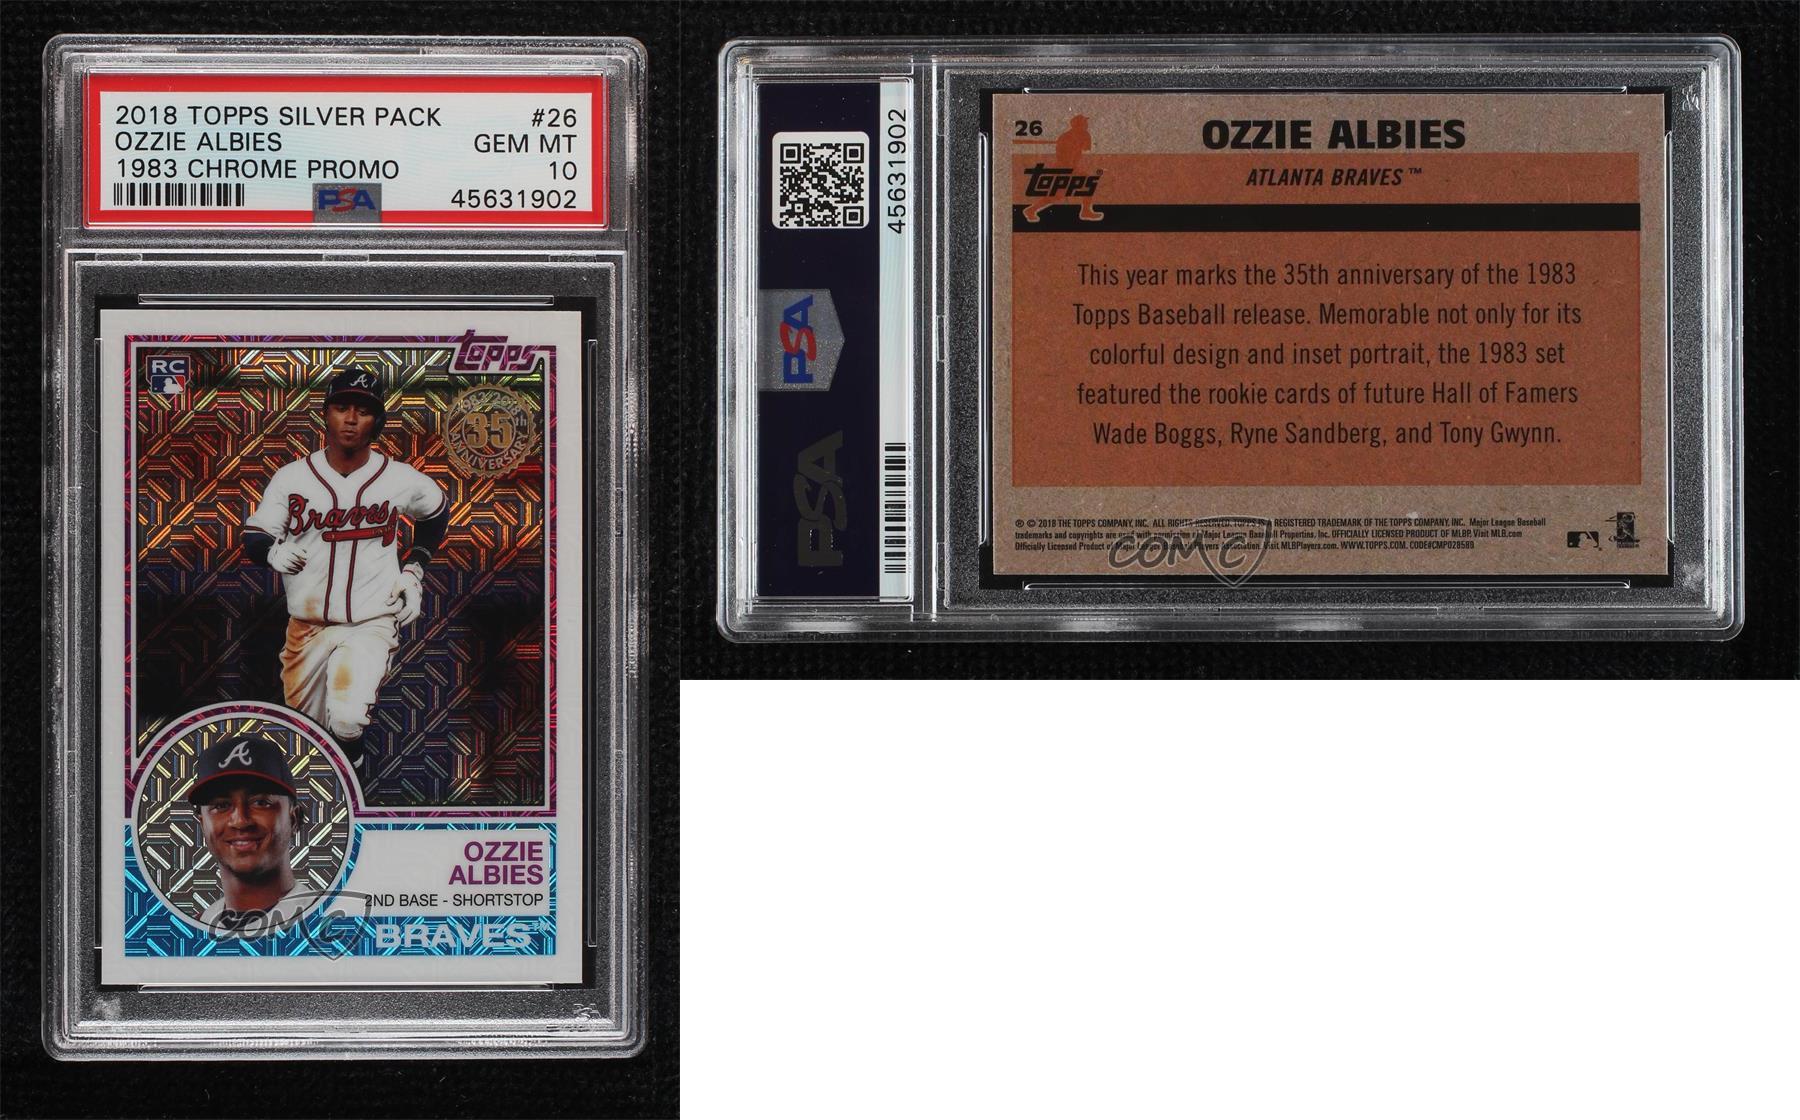 Ozzie Albies 2018 Topps Silver Pack 1983 Retro Rookie Refractor Braves RC QTY 